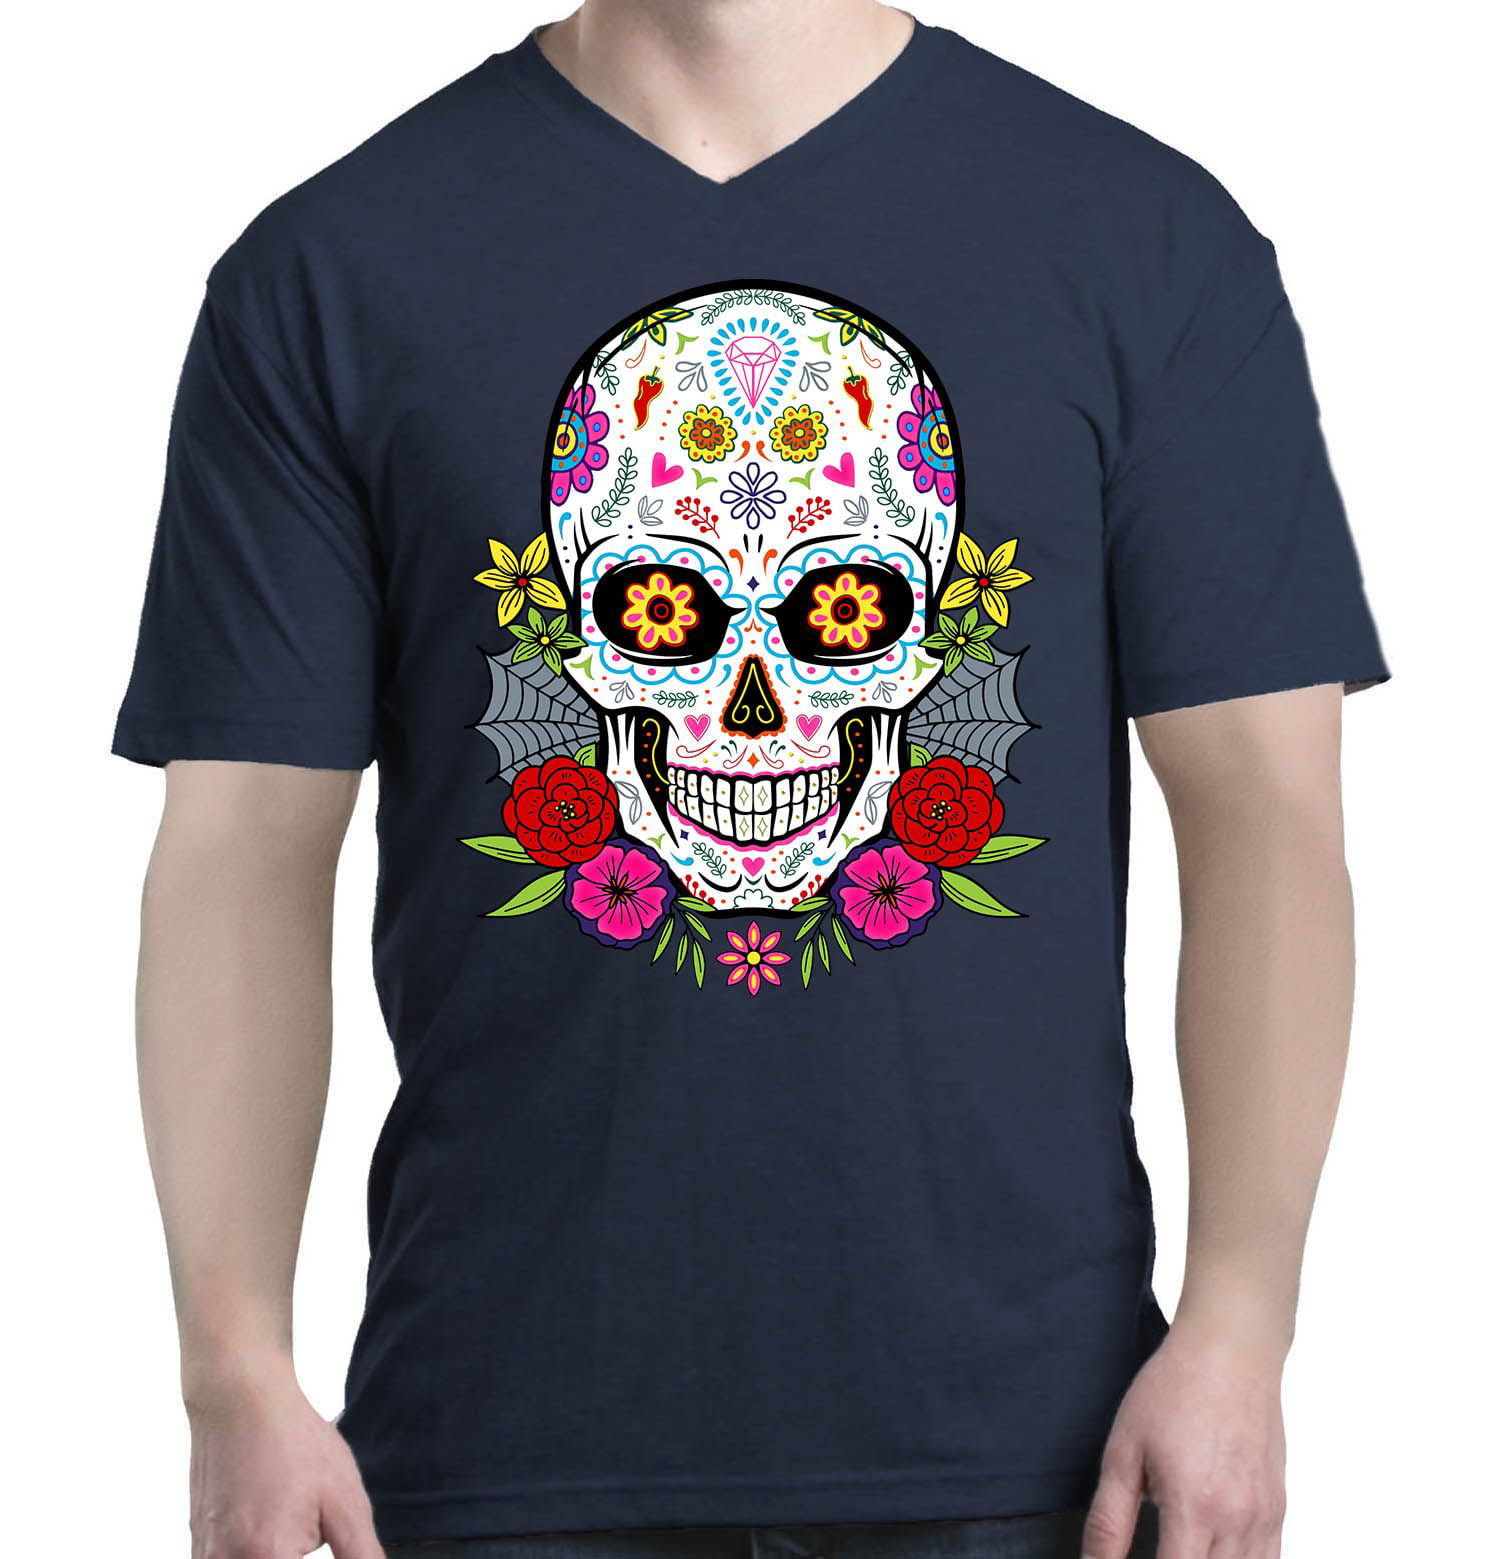 Shop4Ever - Shop4Ever Men's Day of the Dead Skull with Flowers V-Neck T ...